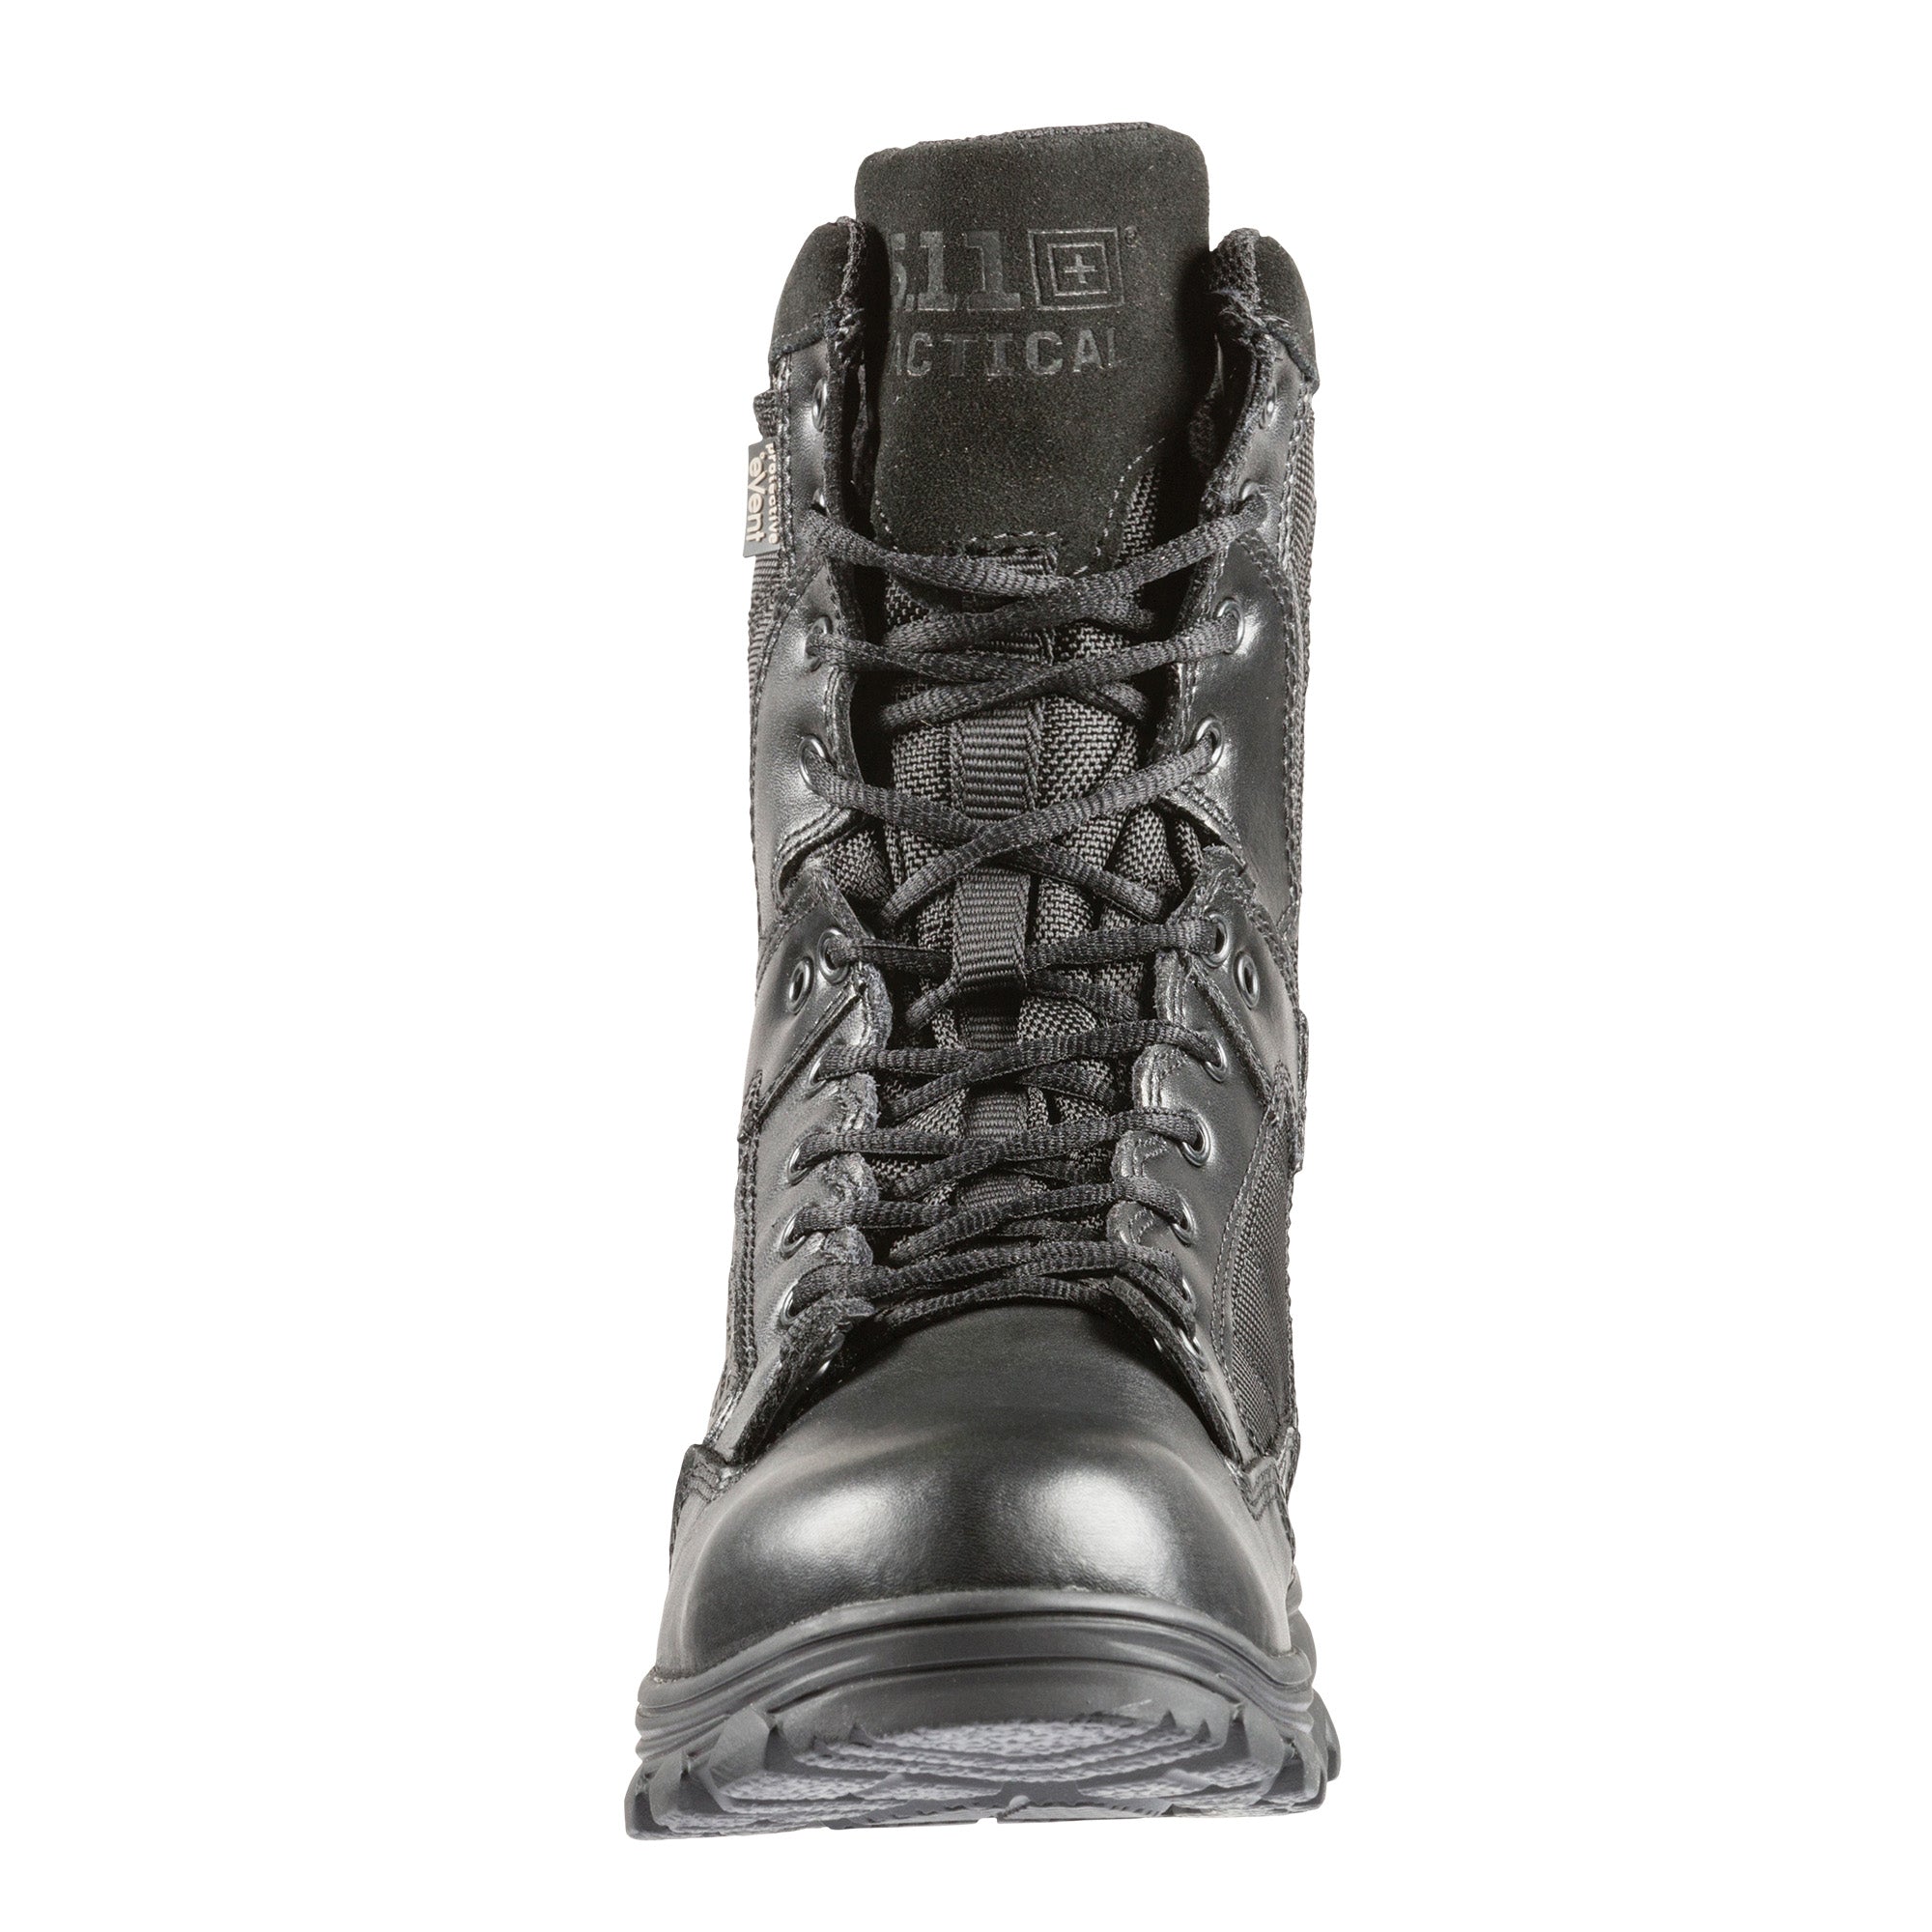 5.11 tactical 8 evo side zip insulated boot